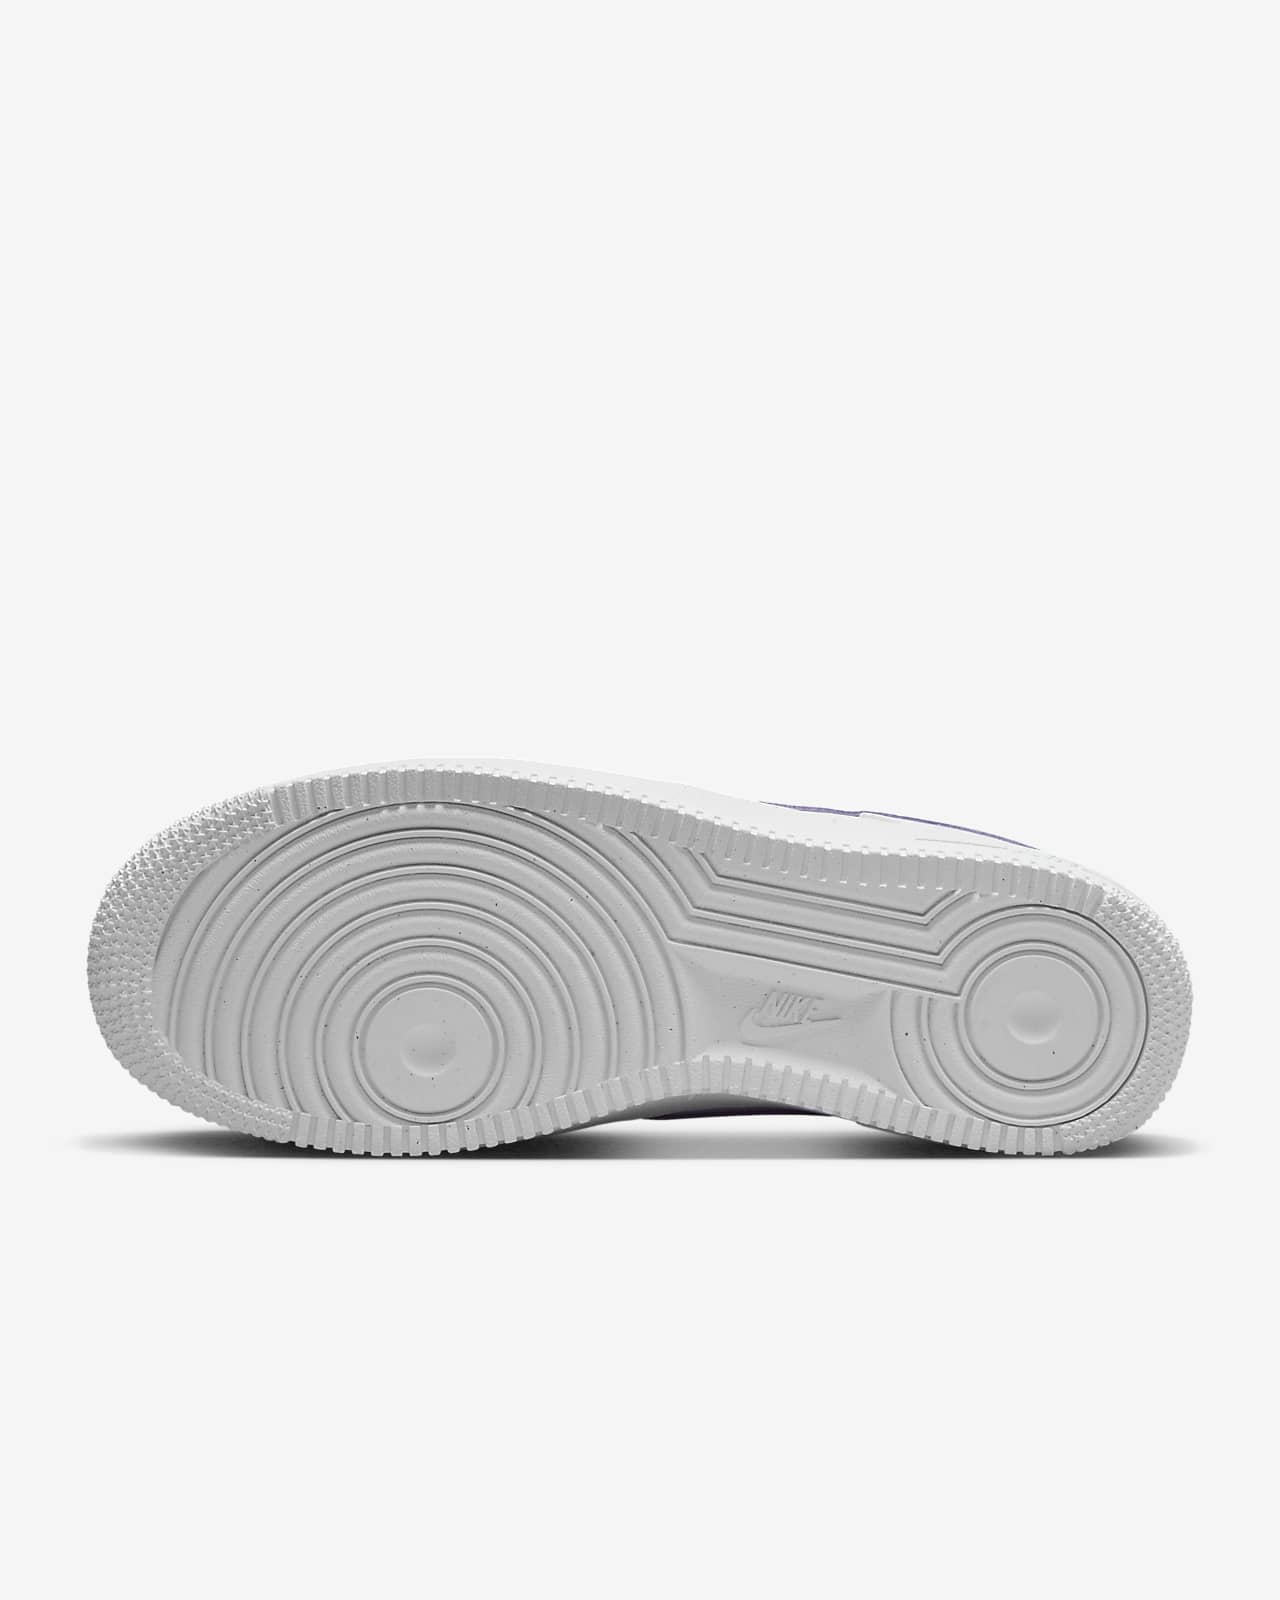 white nike air force women's shoes